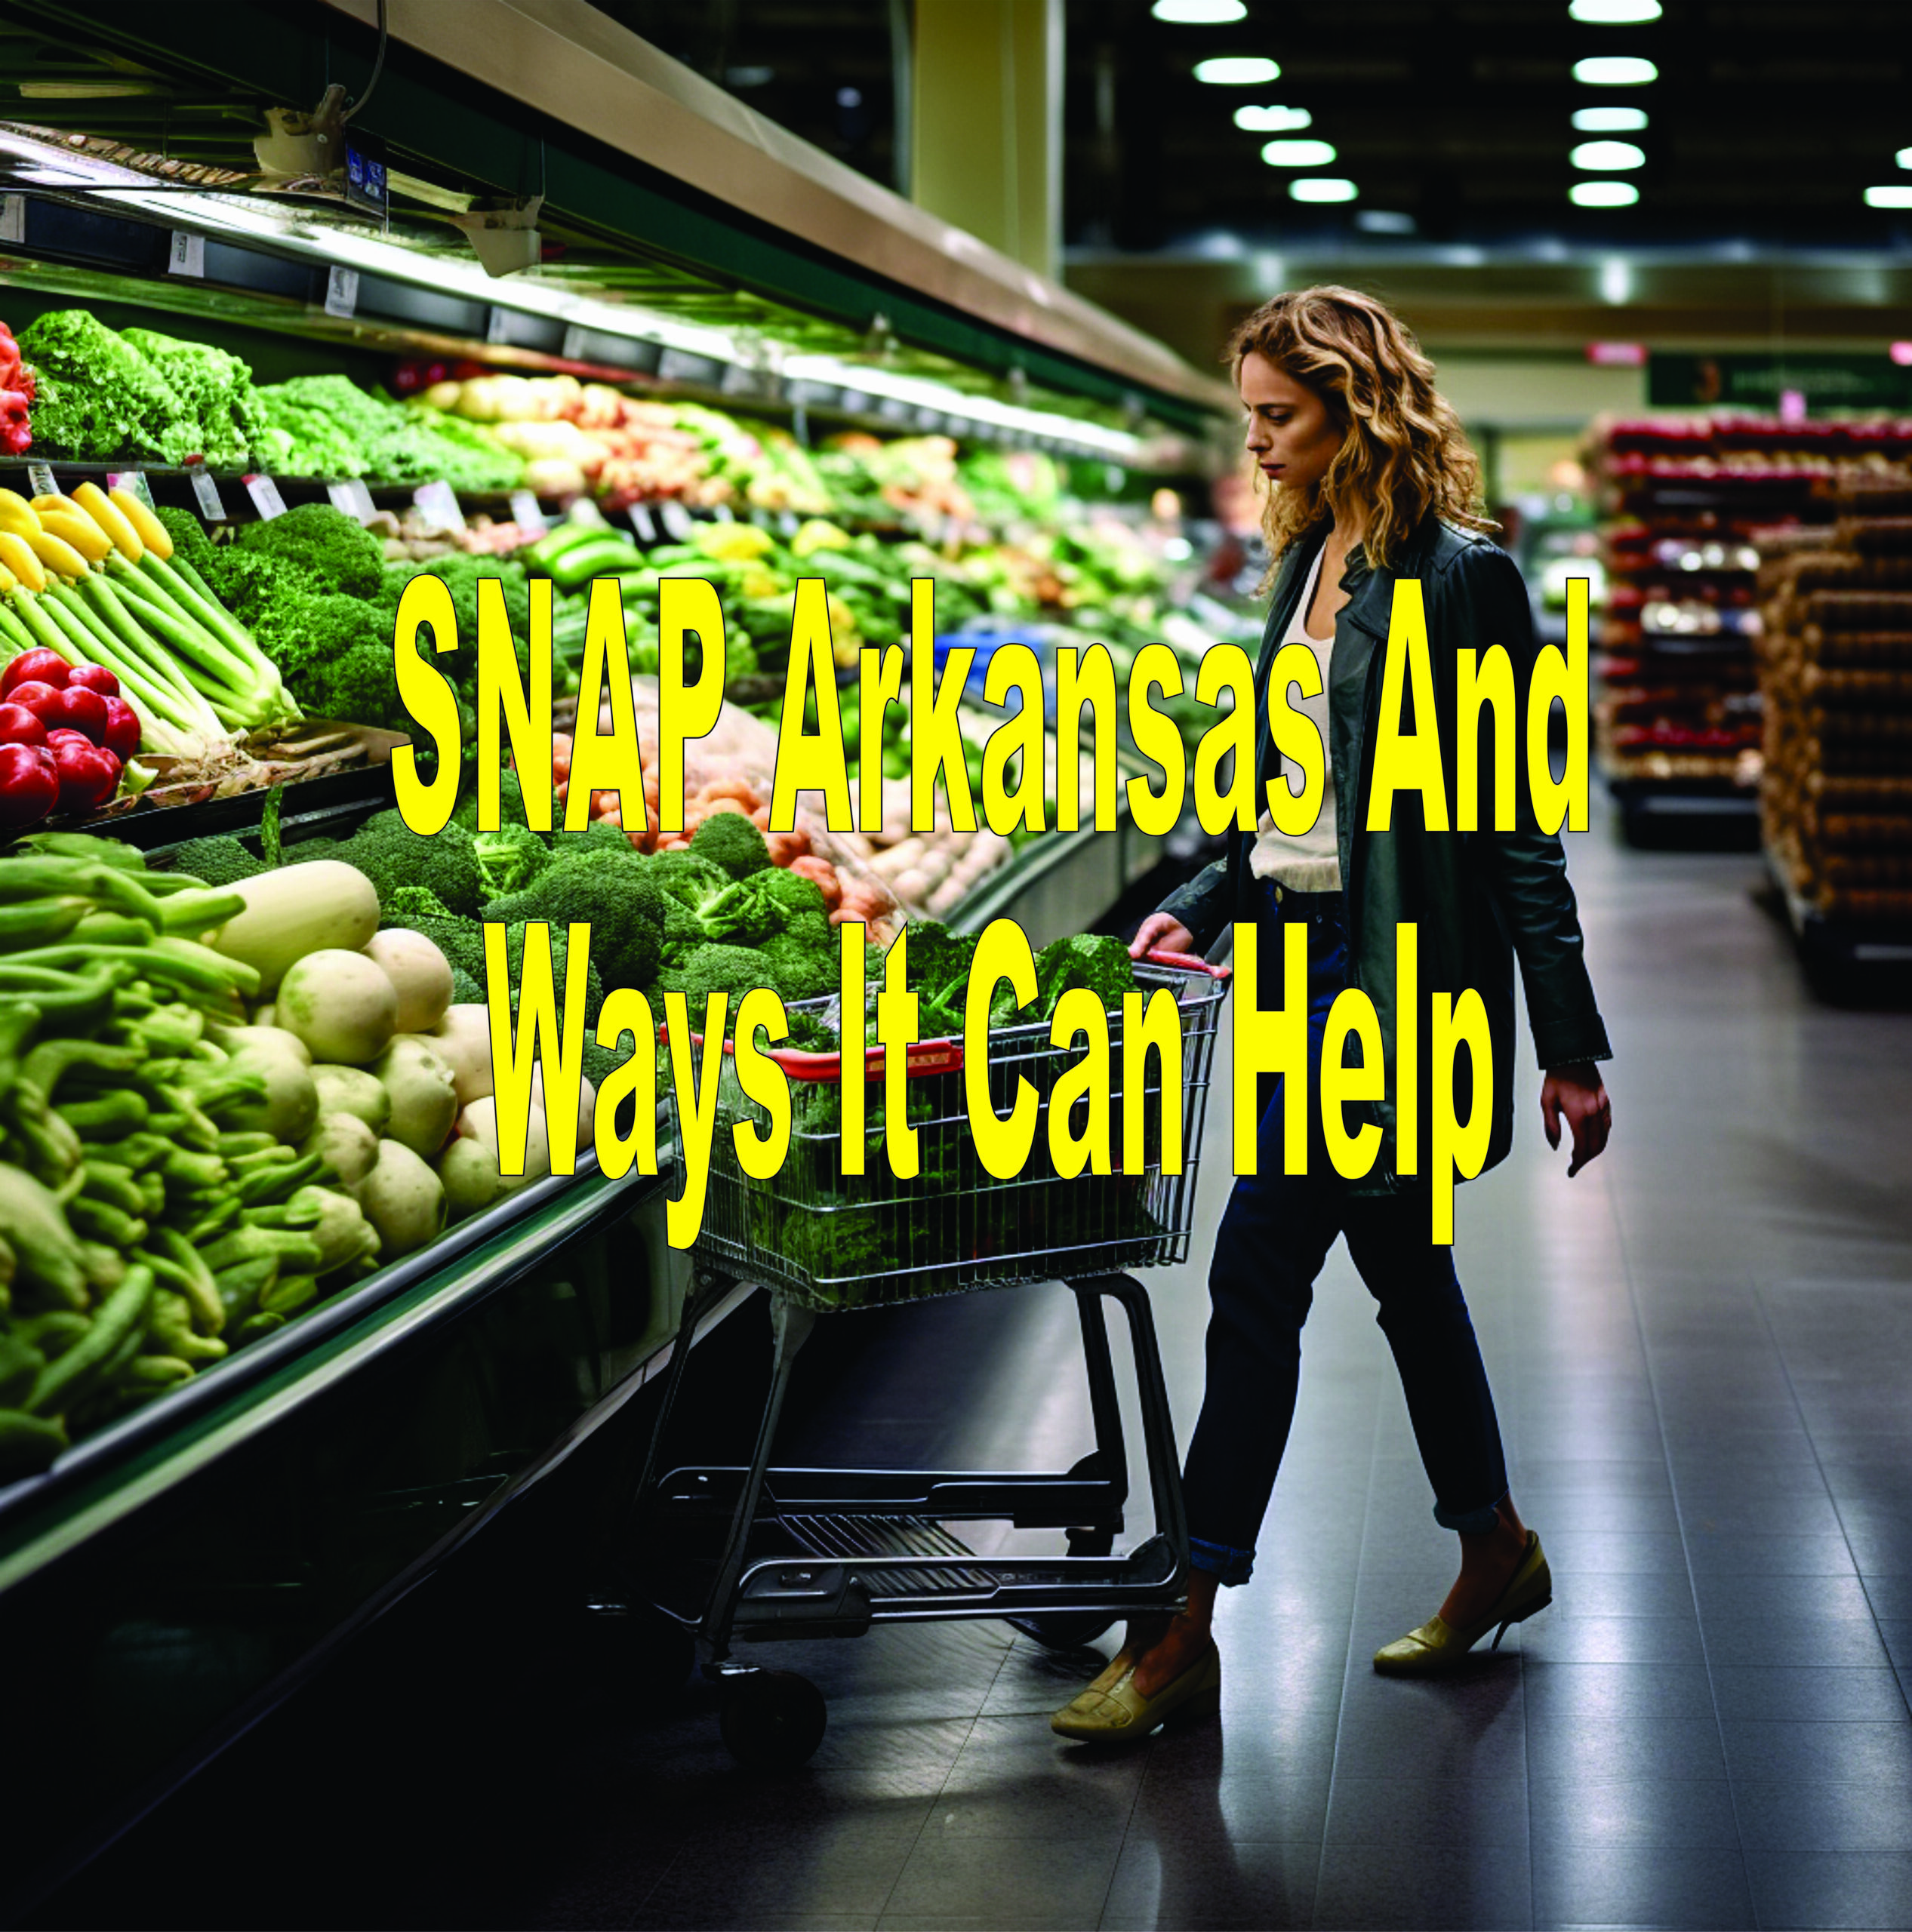 Snap Arkansas And Ways It Can Help